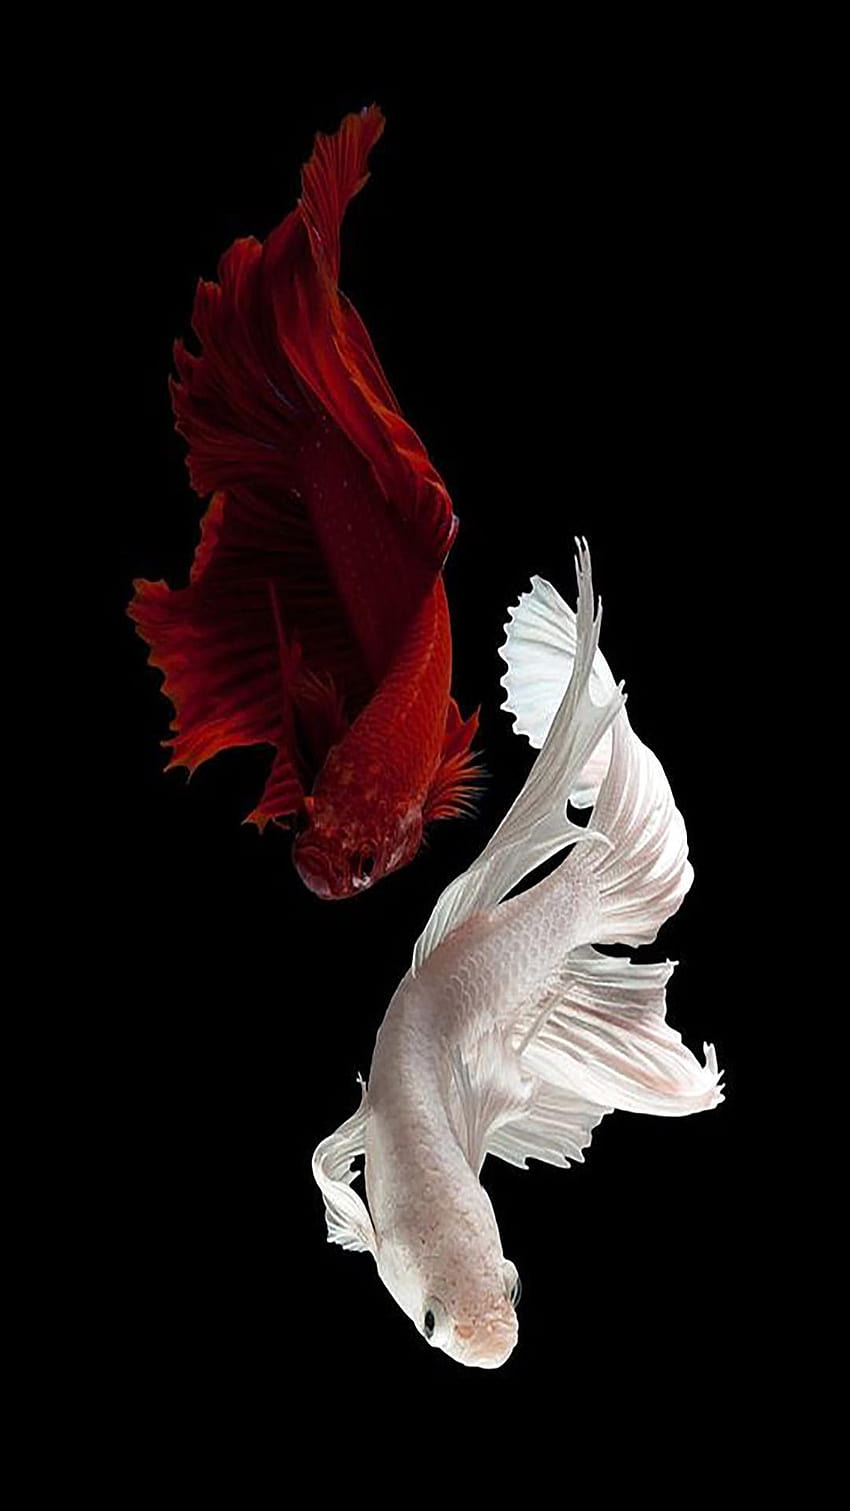 Betta Fish for Android, amoled fish HD phone wallpaper